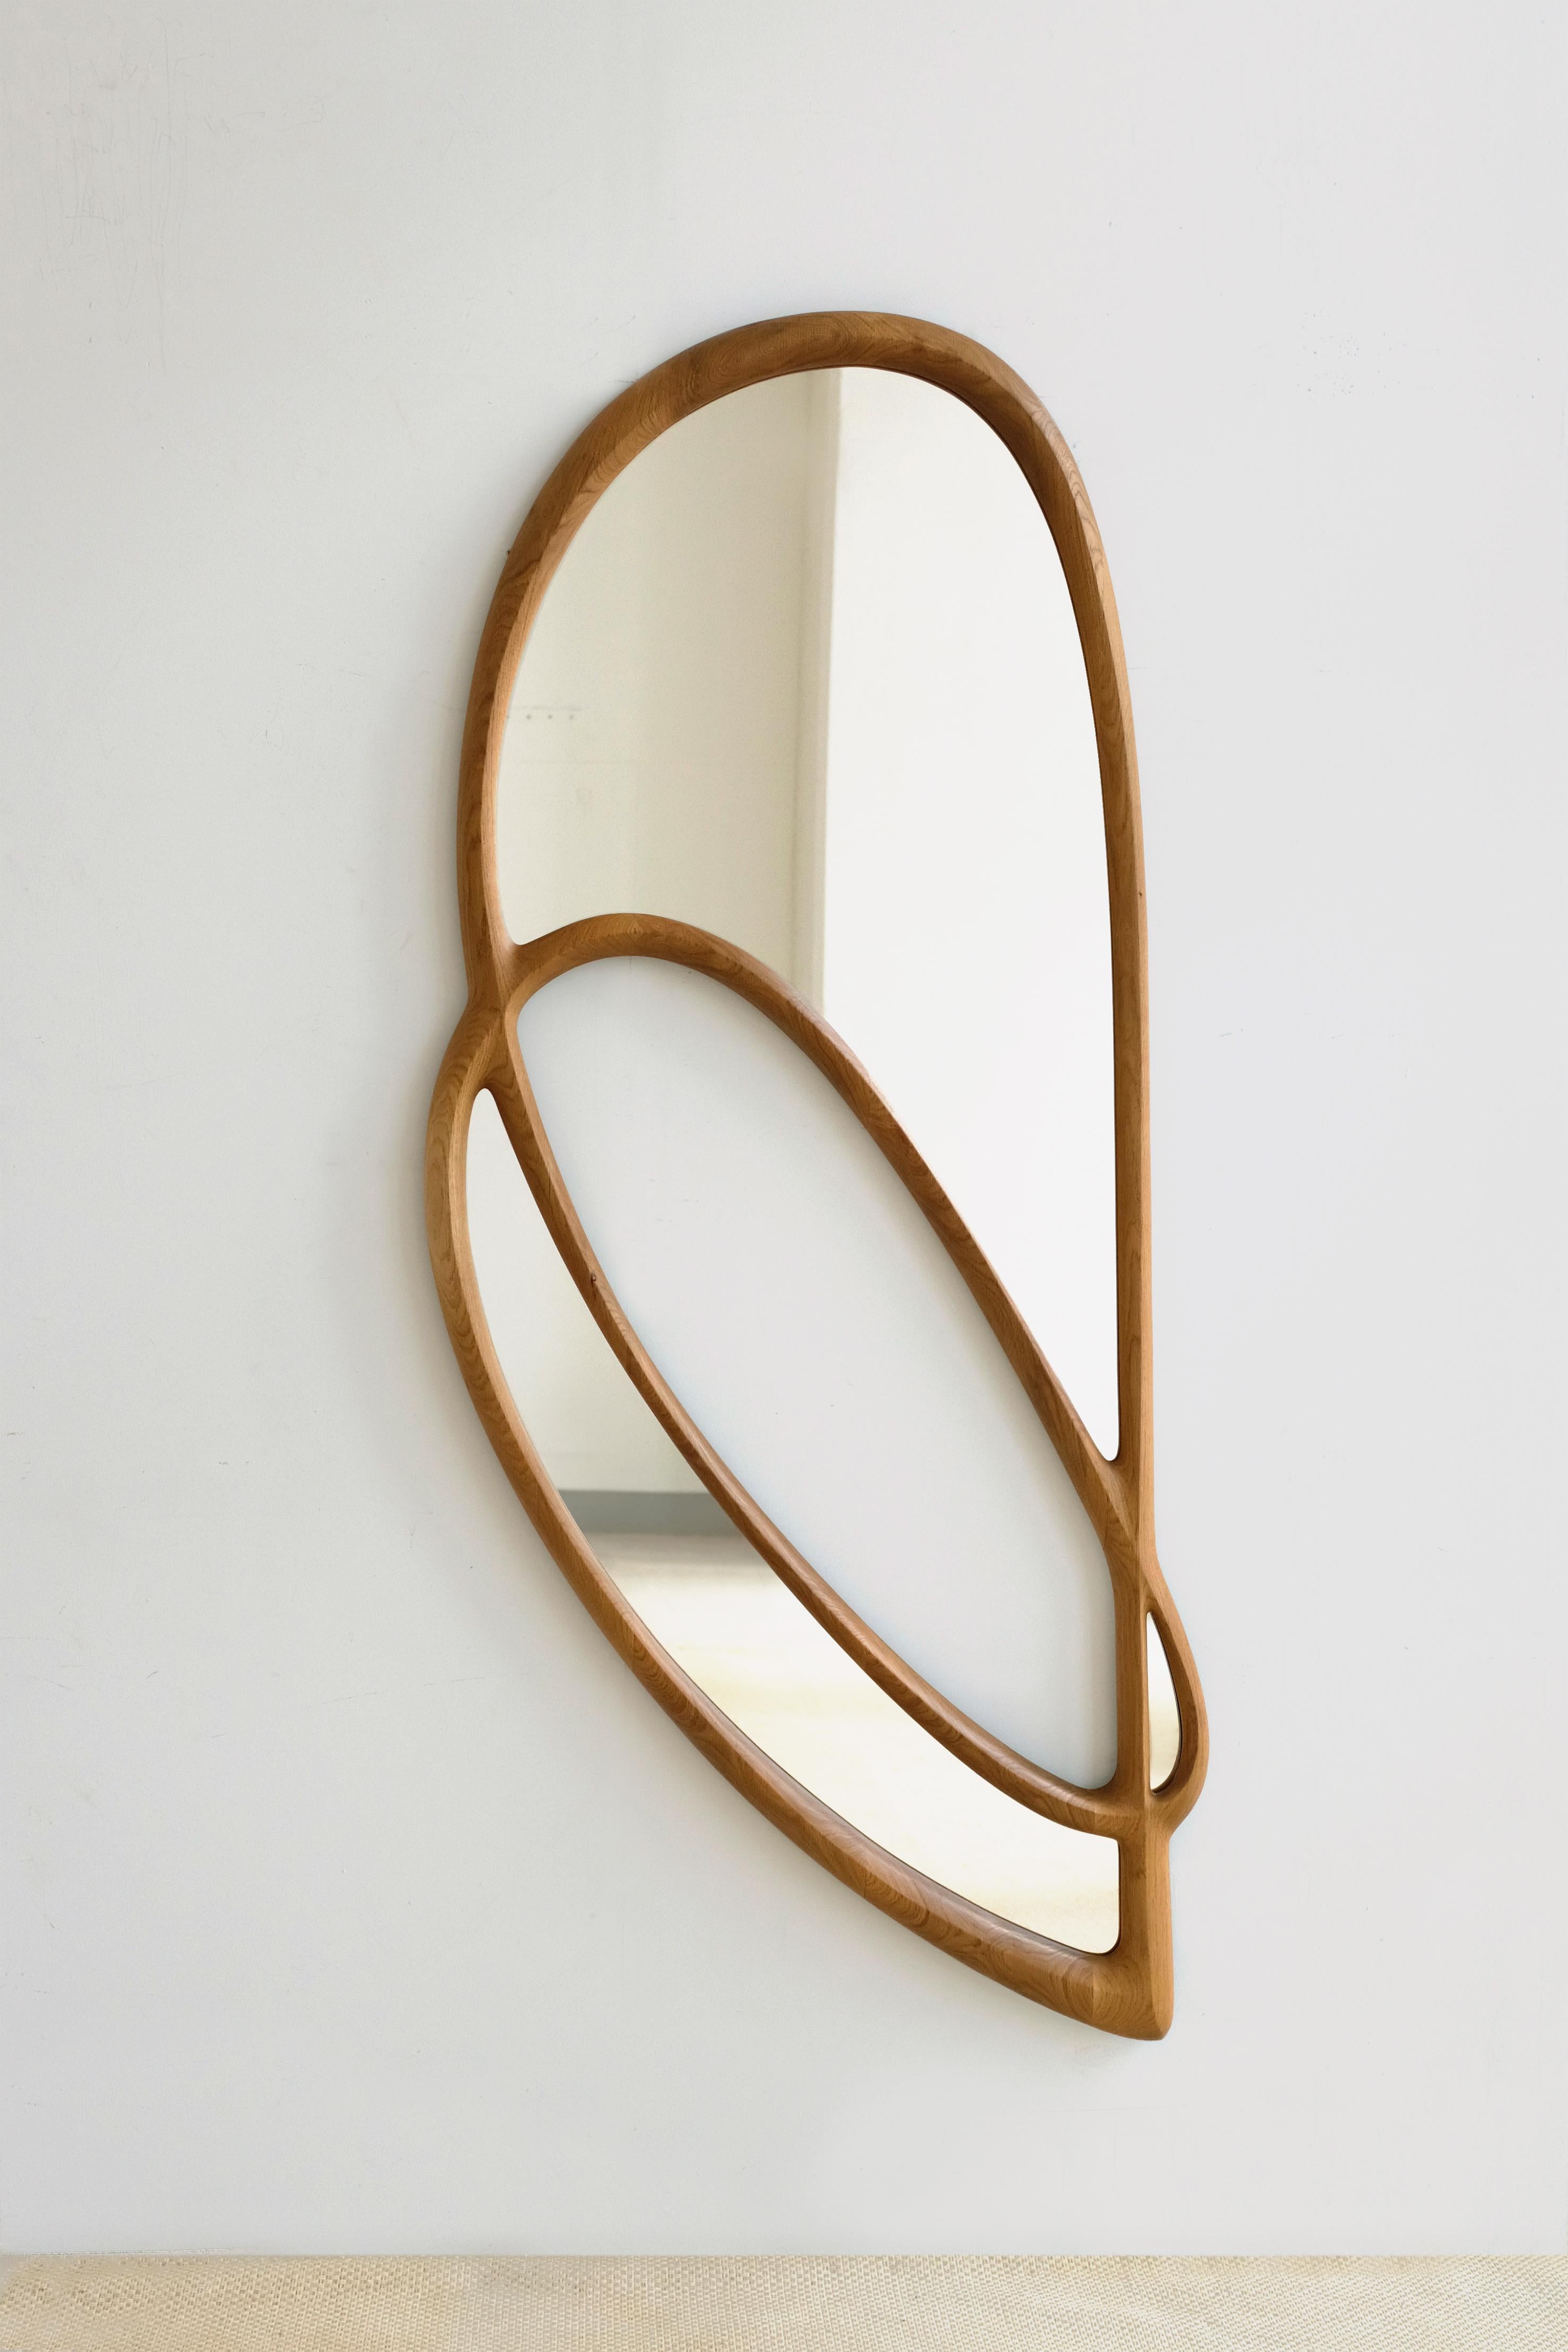 'Momentum Mirror II' by Soo Joo is a wooden wall mirror with a unique but timeless asymmetric form. It is hung with a custom-made steel French cleats, and can be hung horizontally and vertically.

This mirror silhouette is minimal but dynamic